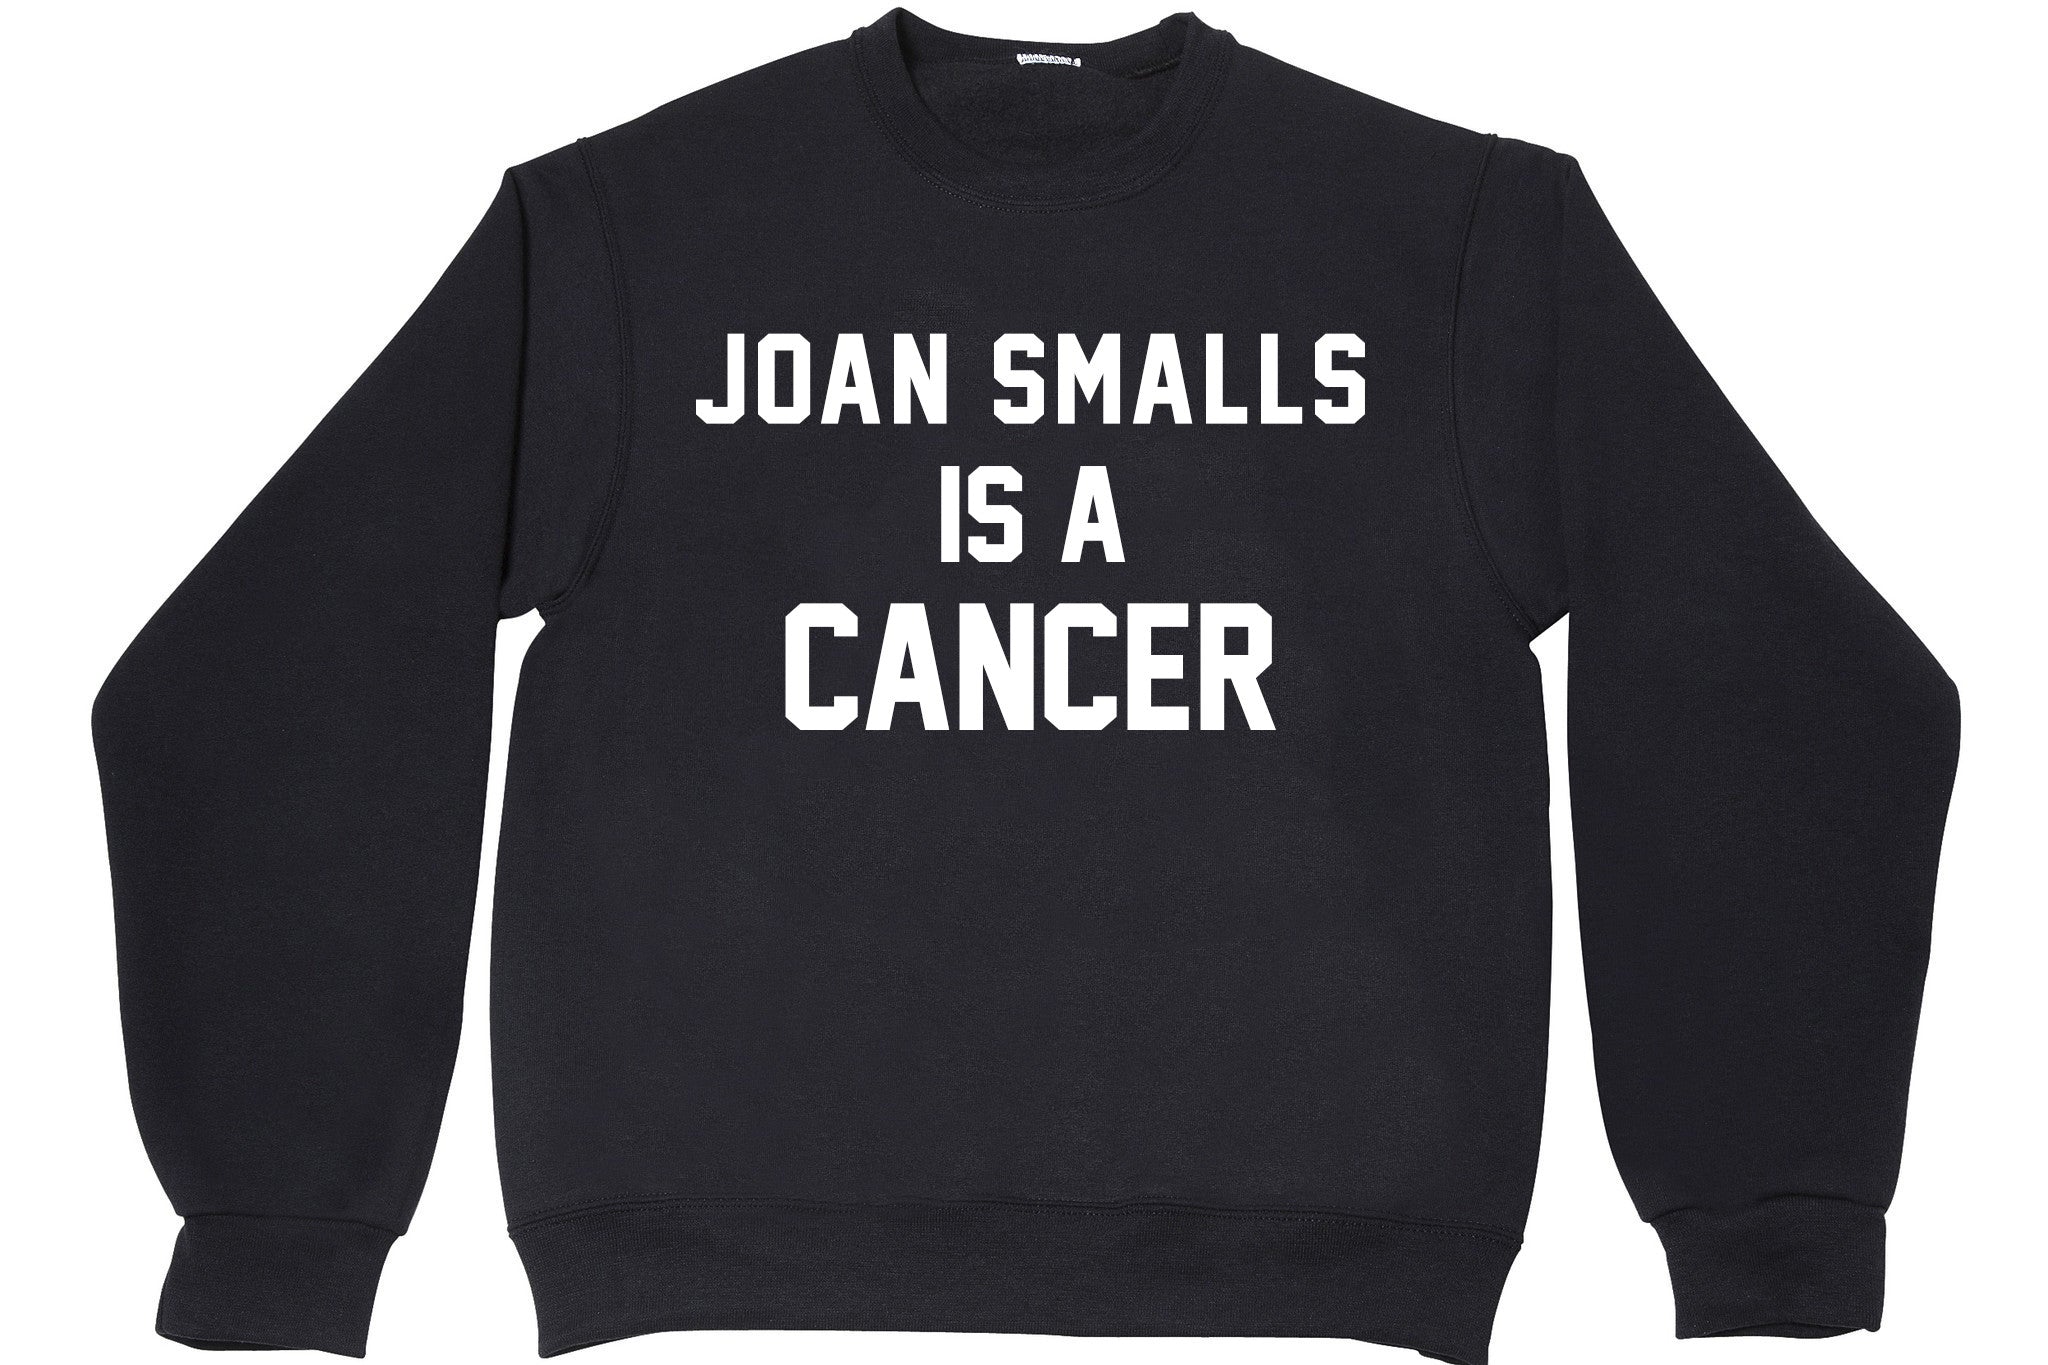 JOAN SMALLS IS A CANCER